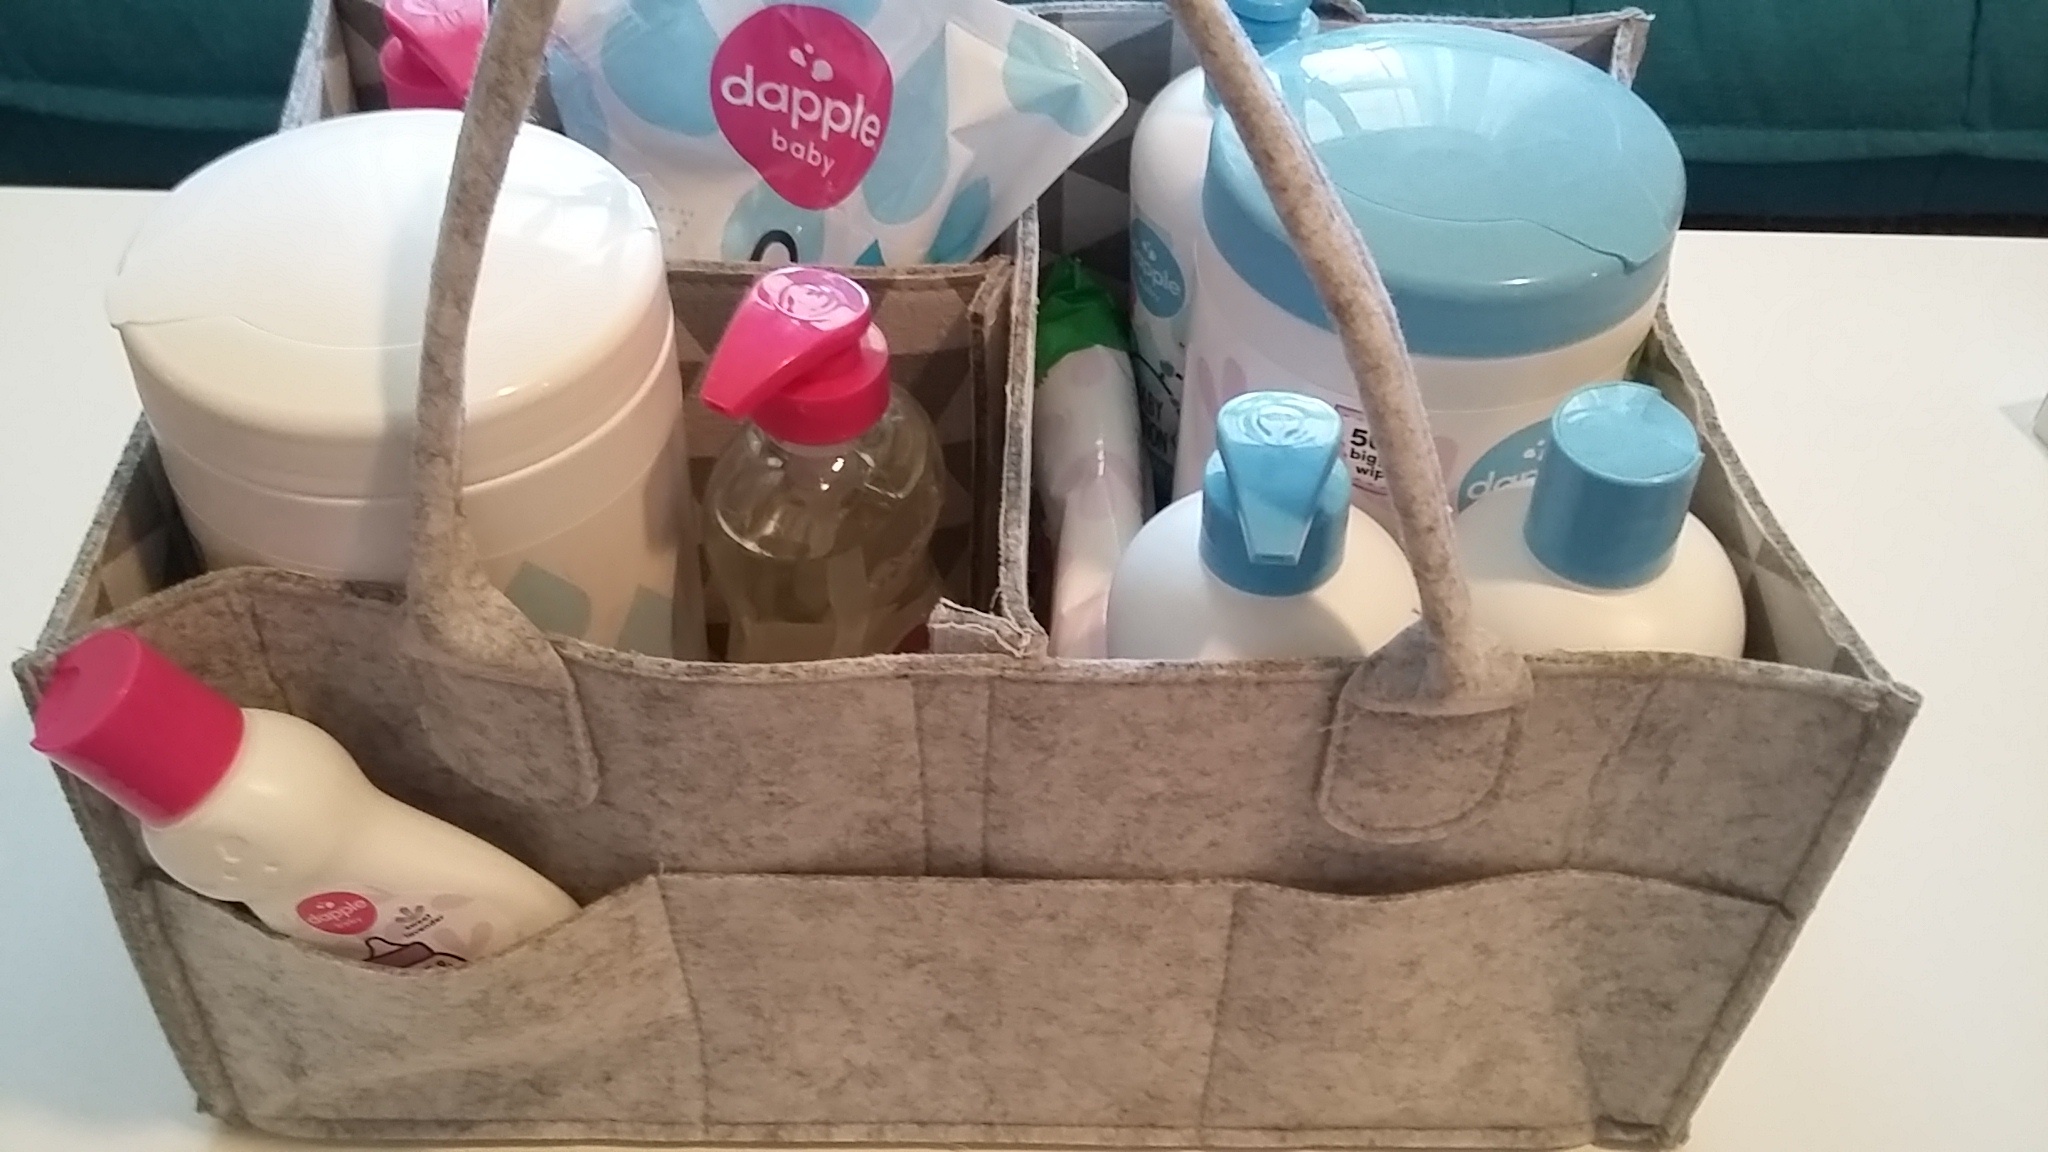 Dapple Baby Plant-Based Household and Personal Care